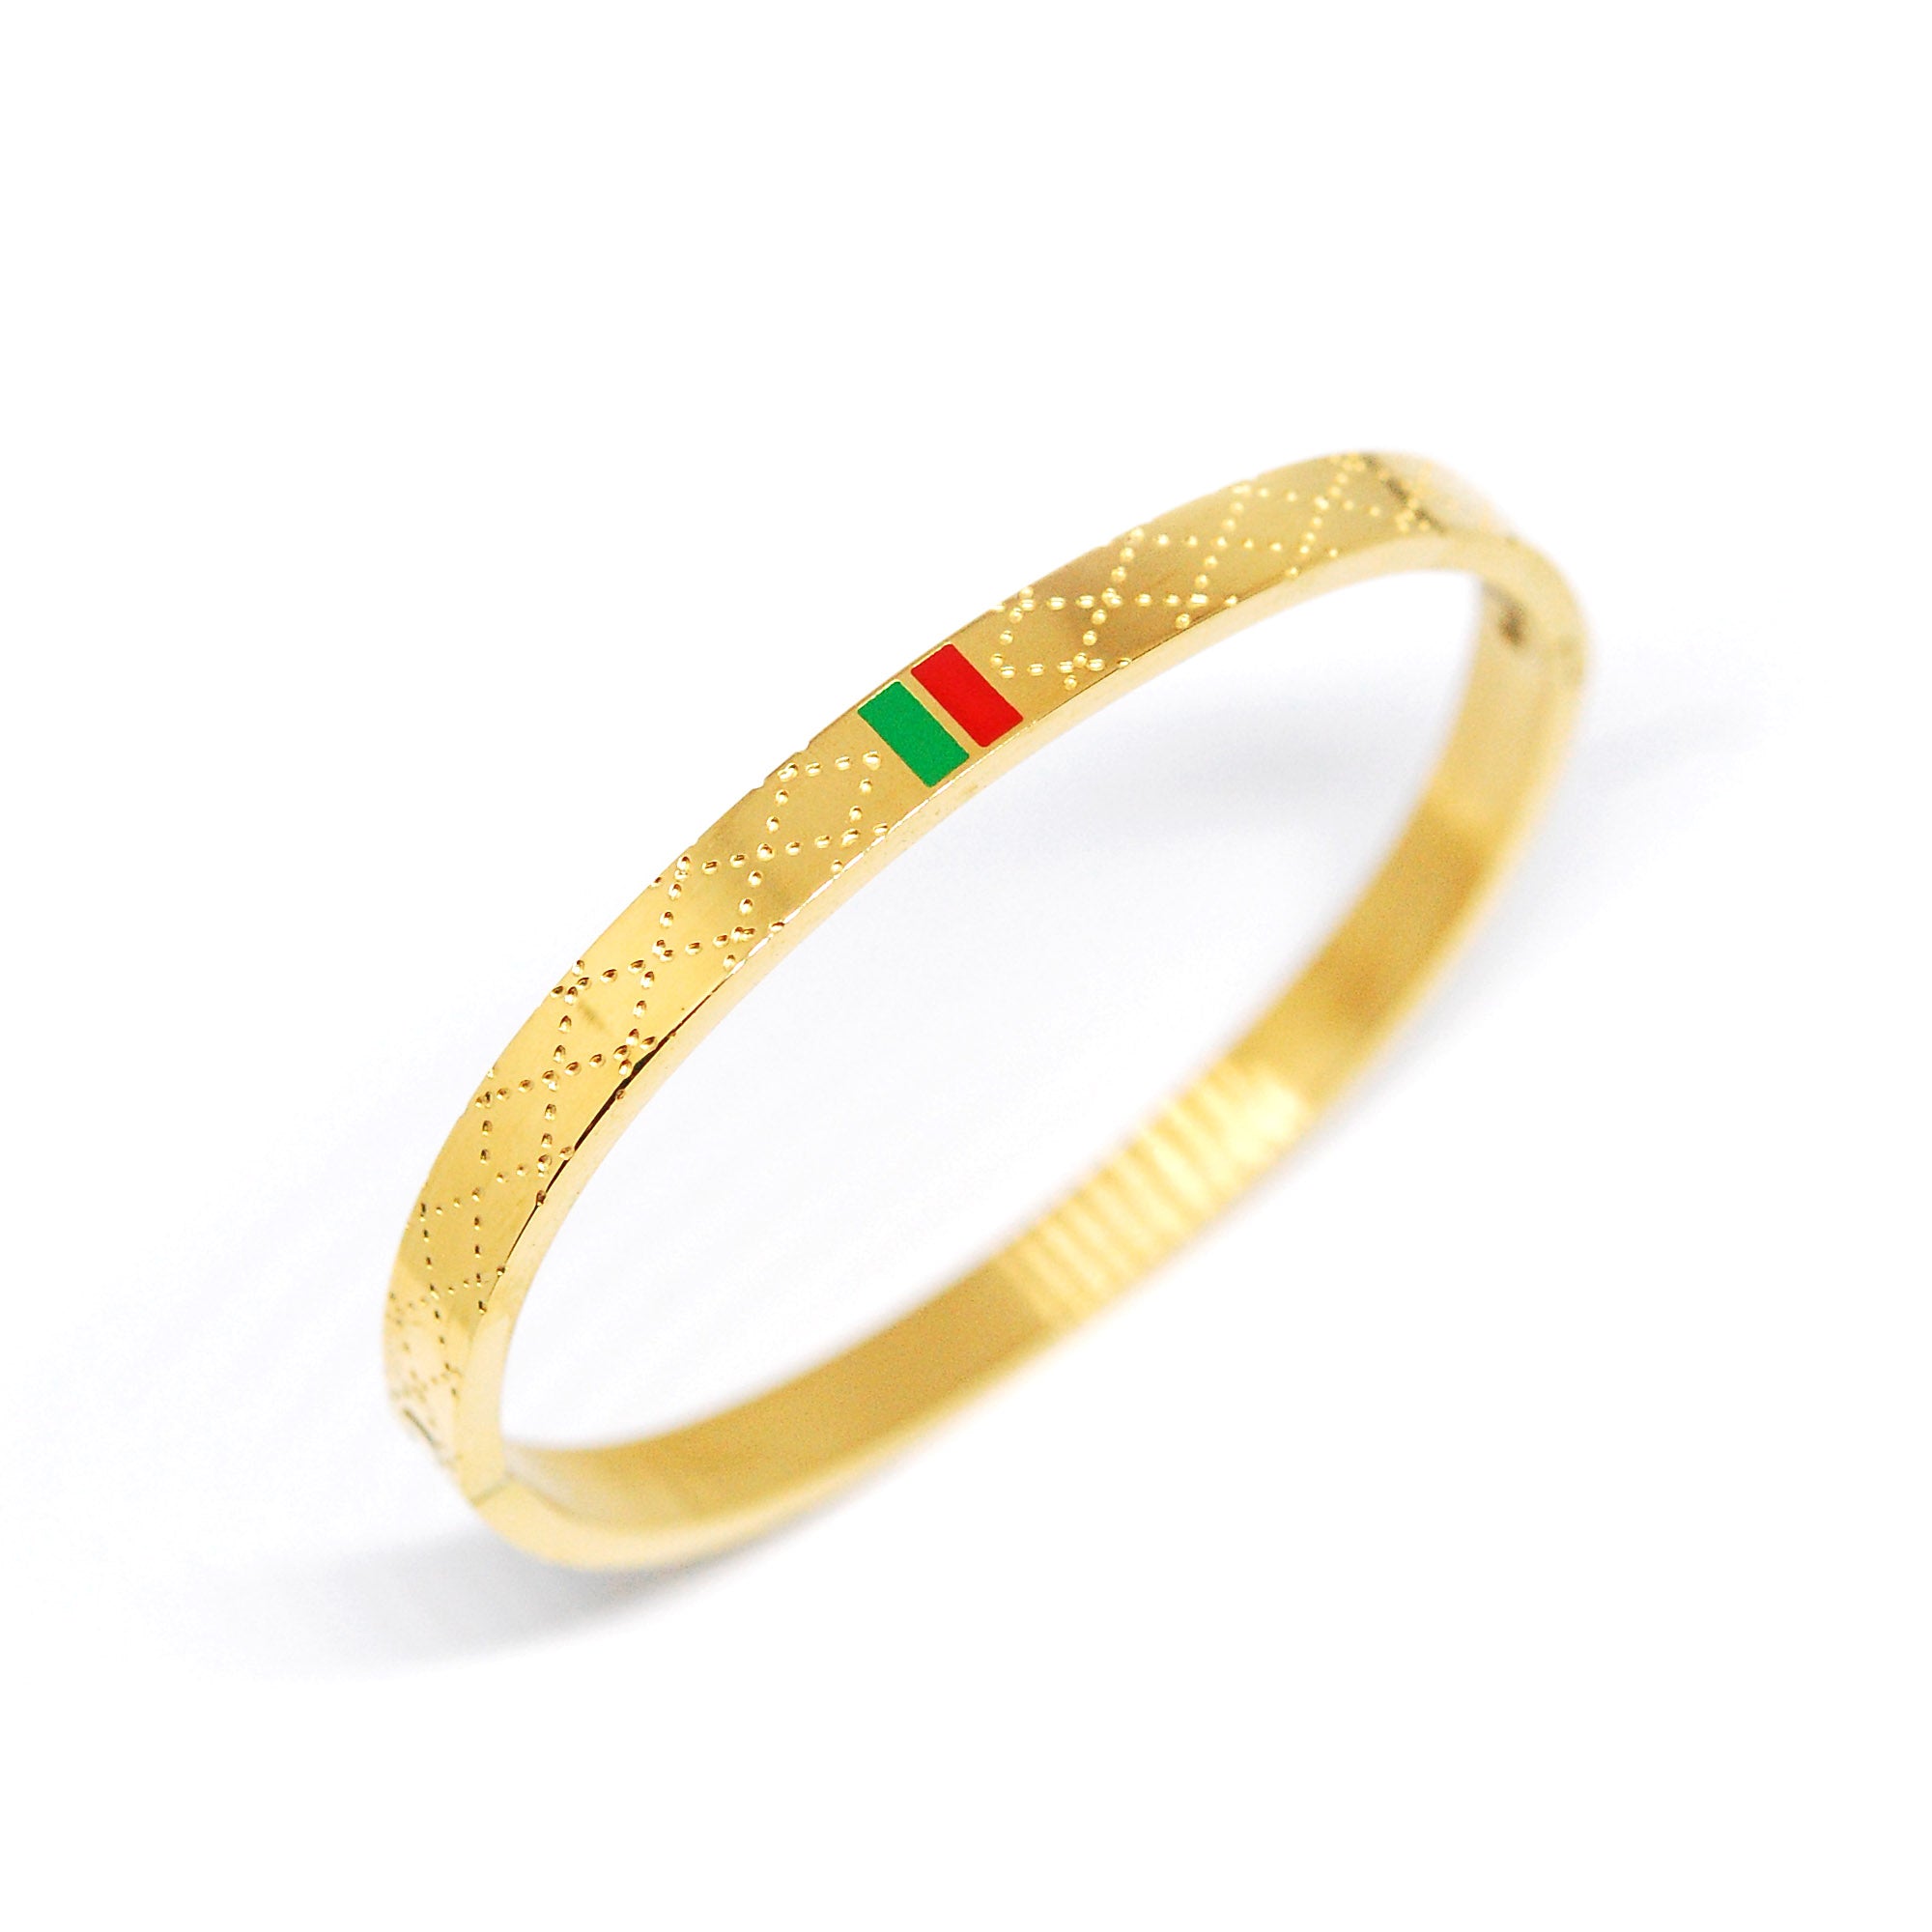 ESBG 7380: Hard Gold-Plated Criss-Cross Bangle w/ Red-Green Bar Accent